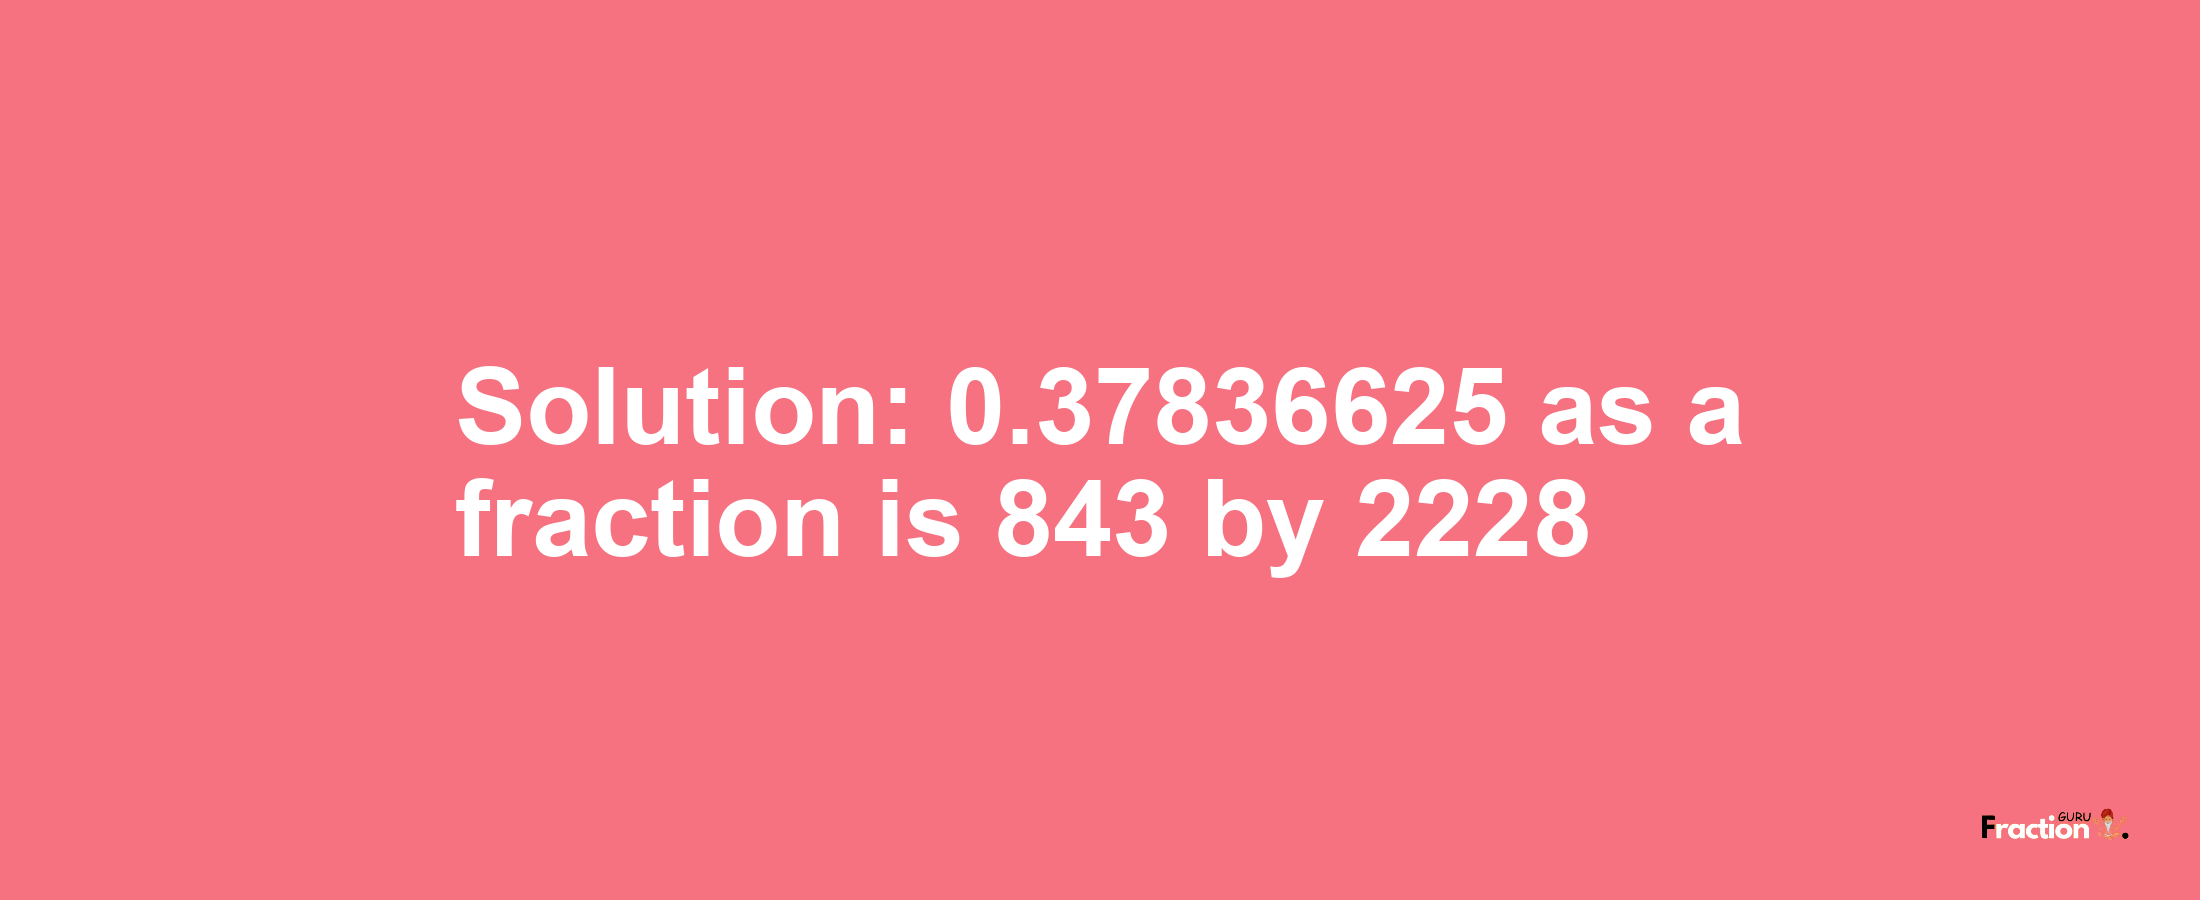 Solution:0.37836625 as a fraction is 843/2228